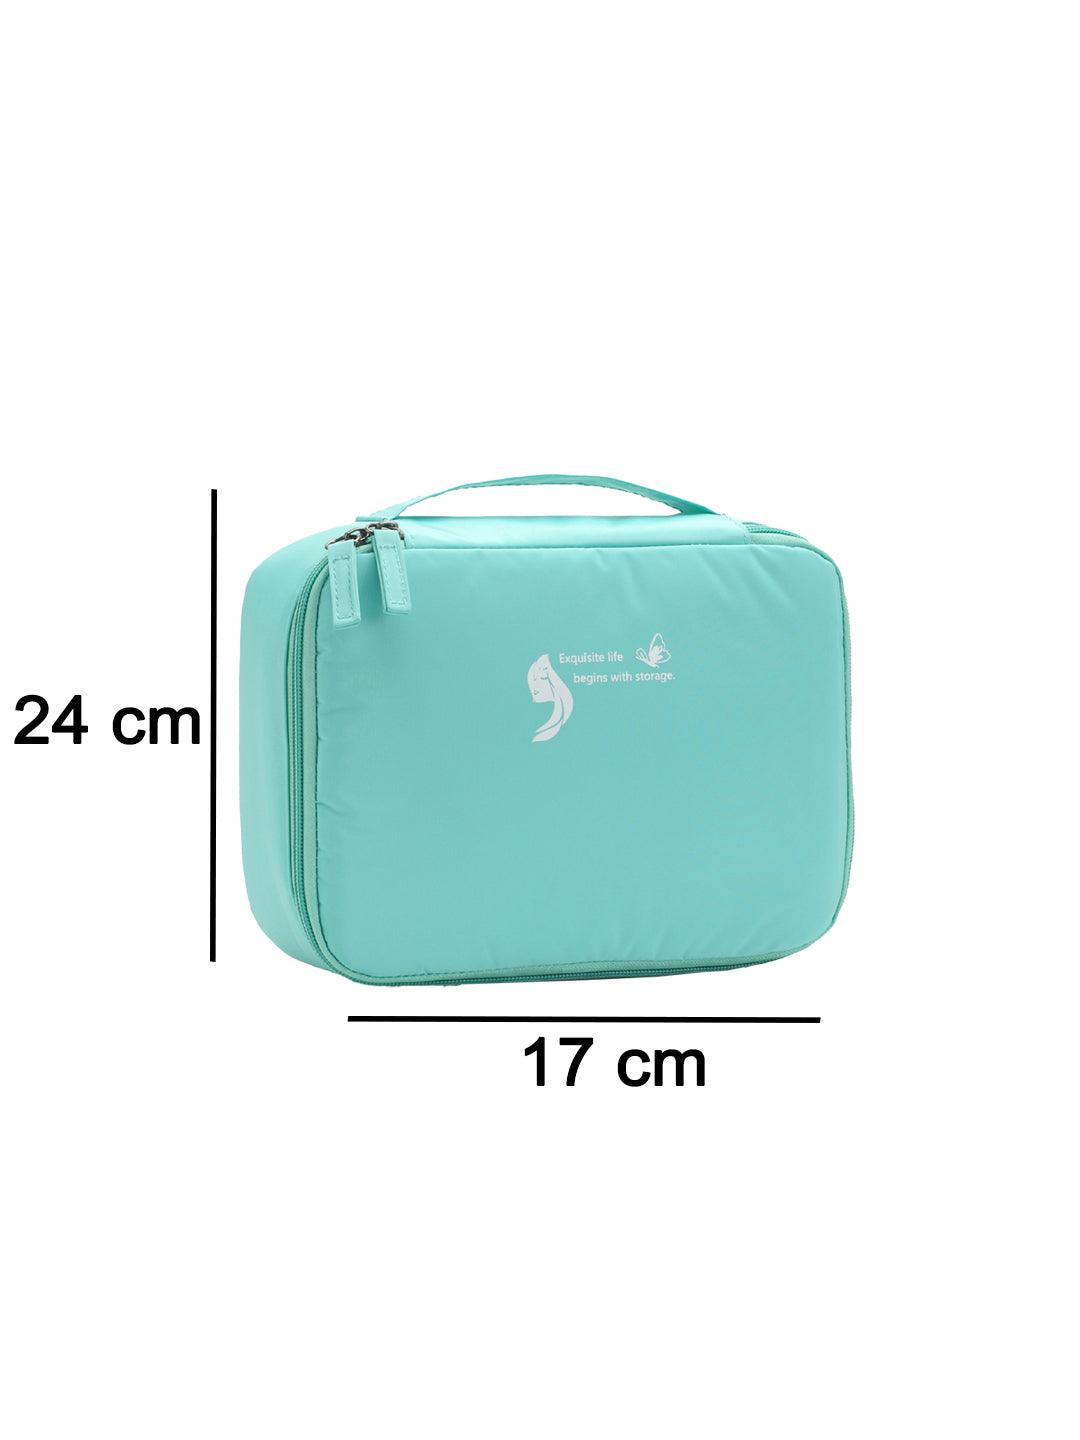 Premium Travel Hanging Toiletry Bag for Men and Women with Expandable  Compartmen | eBay